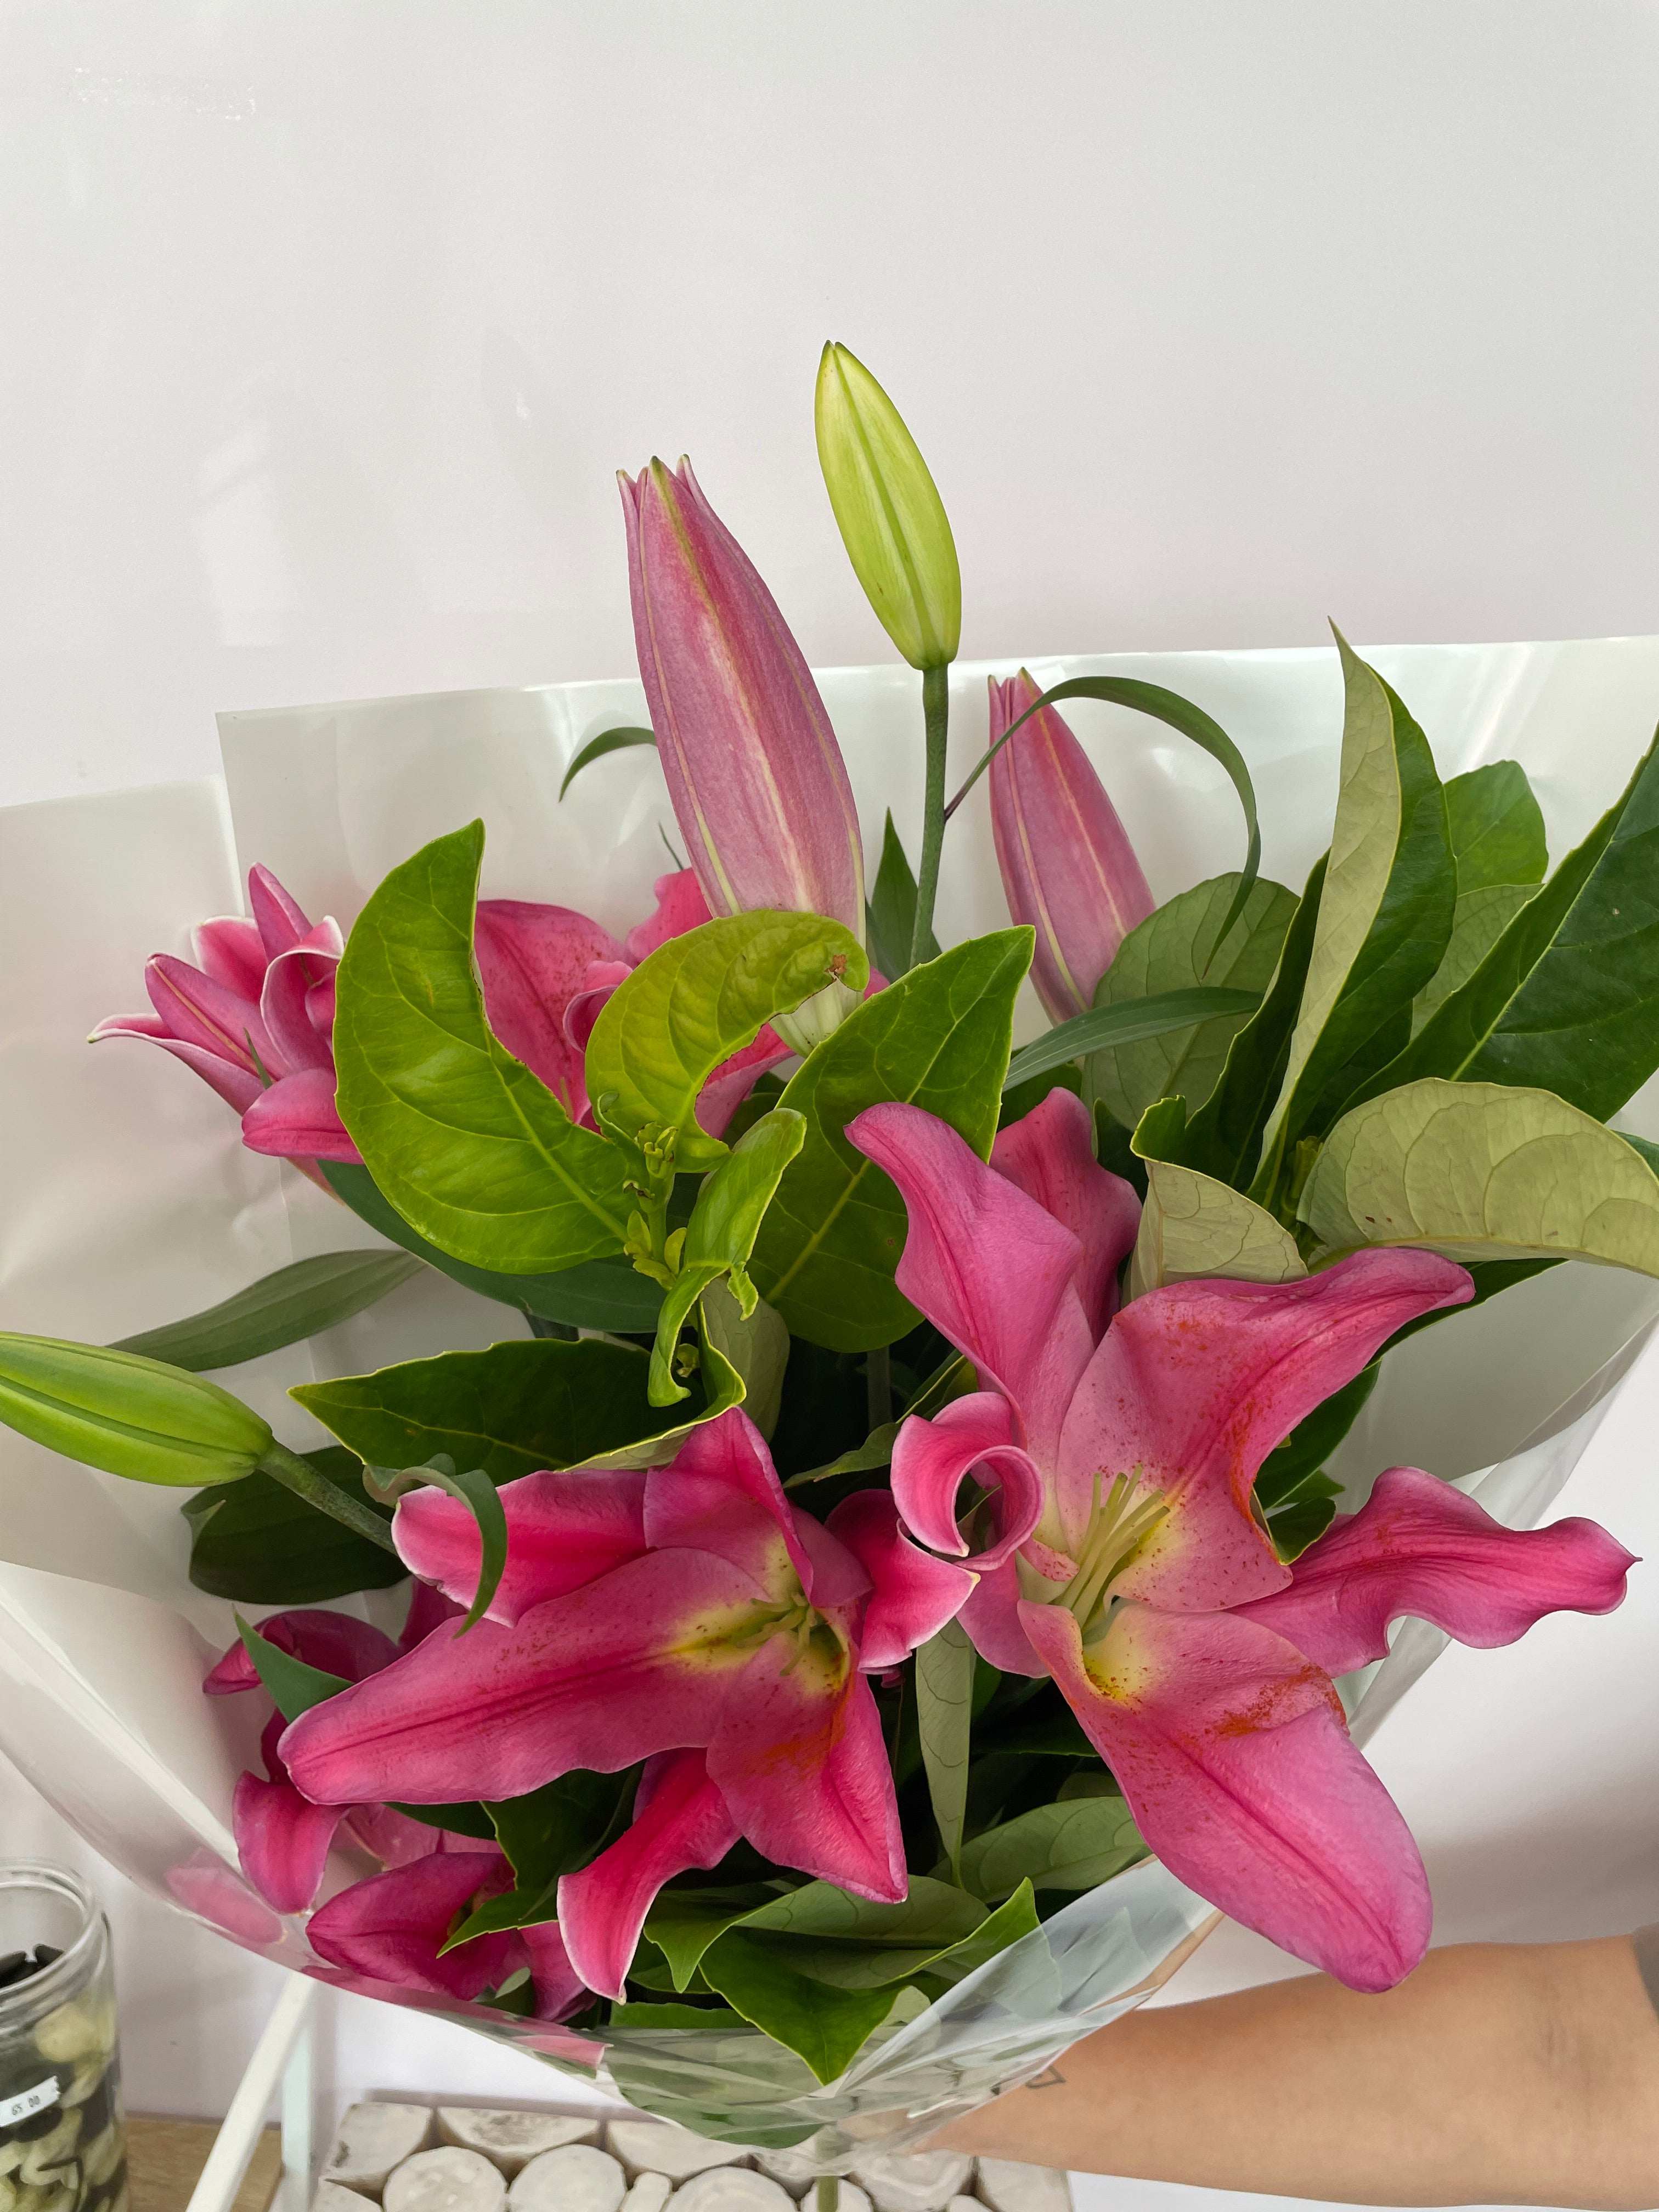 Flower delivery perth - Perth Flower Delivery - Stunning Floral Arrangements